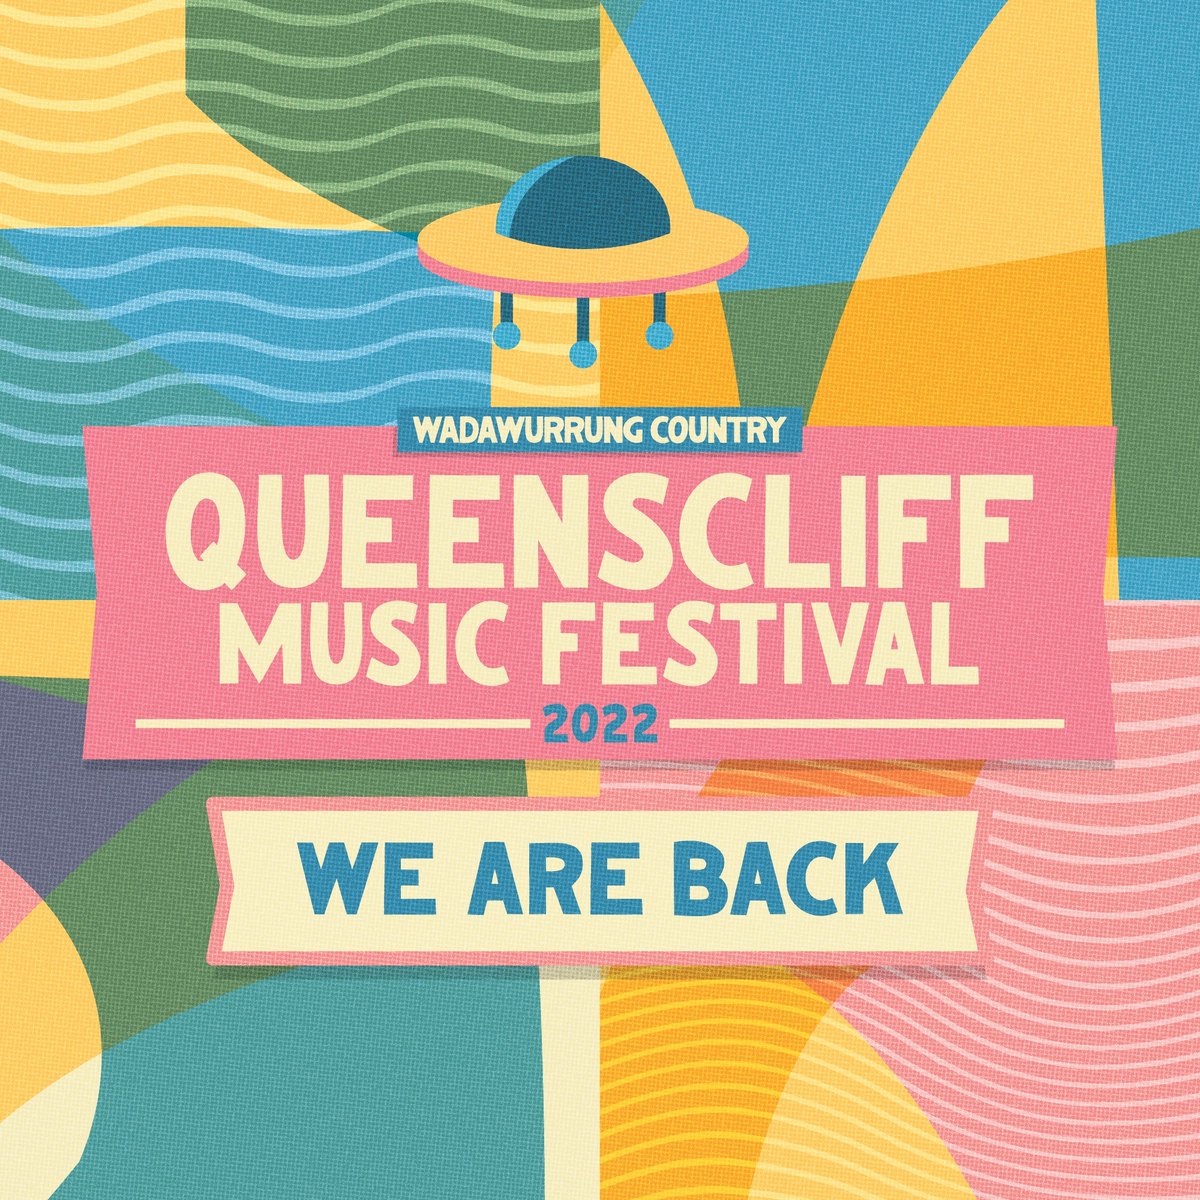 Cookie Robinson (Year 9) has earnt herself a performance spot at @QueenscliffFest on Saturday 26 November! She will be performing her original songs in the ‘The Couta Quarter’ for the 'Foot in the Door' competition from 5:15pm - 5:30pm. #queenscliffmusicfestival #localtalent